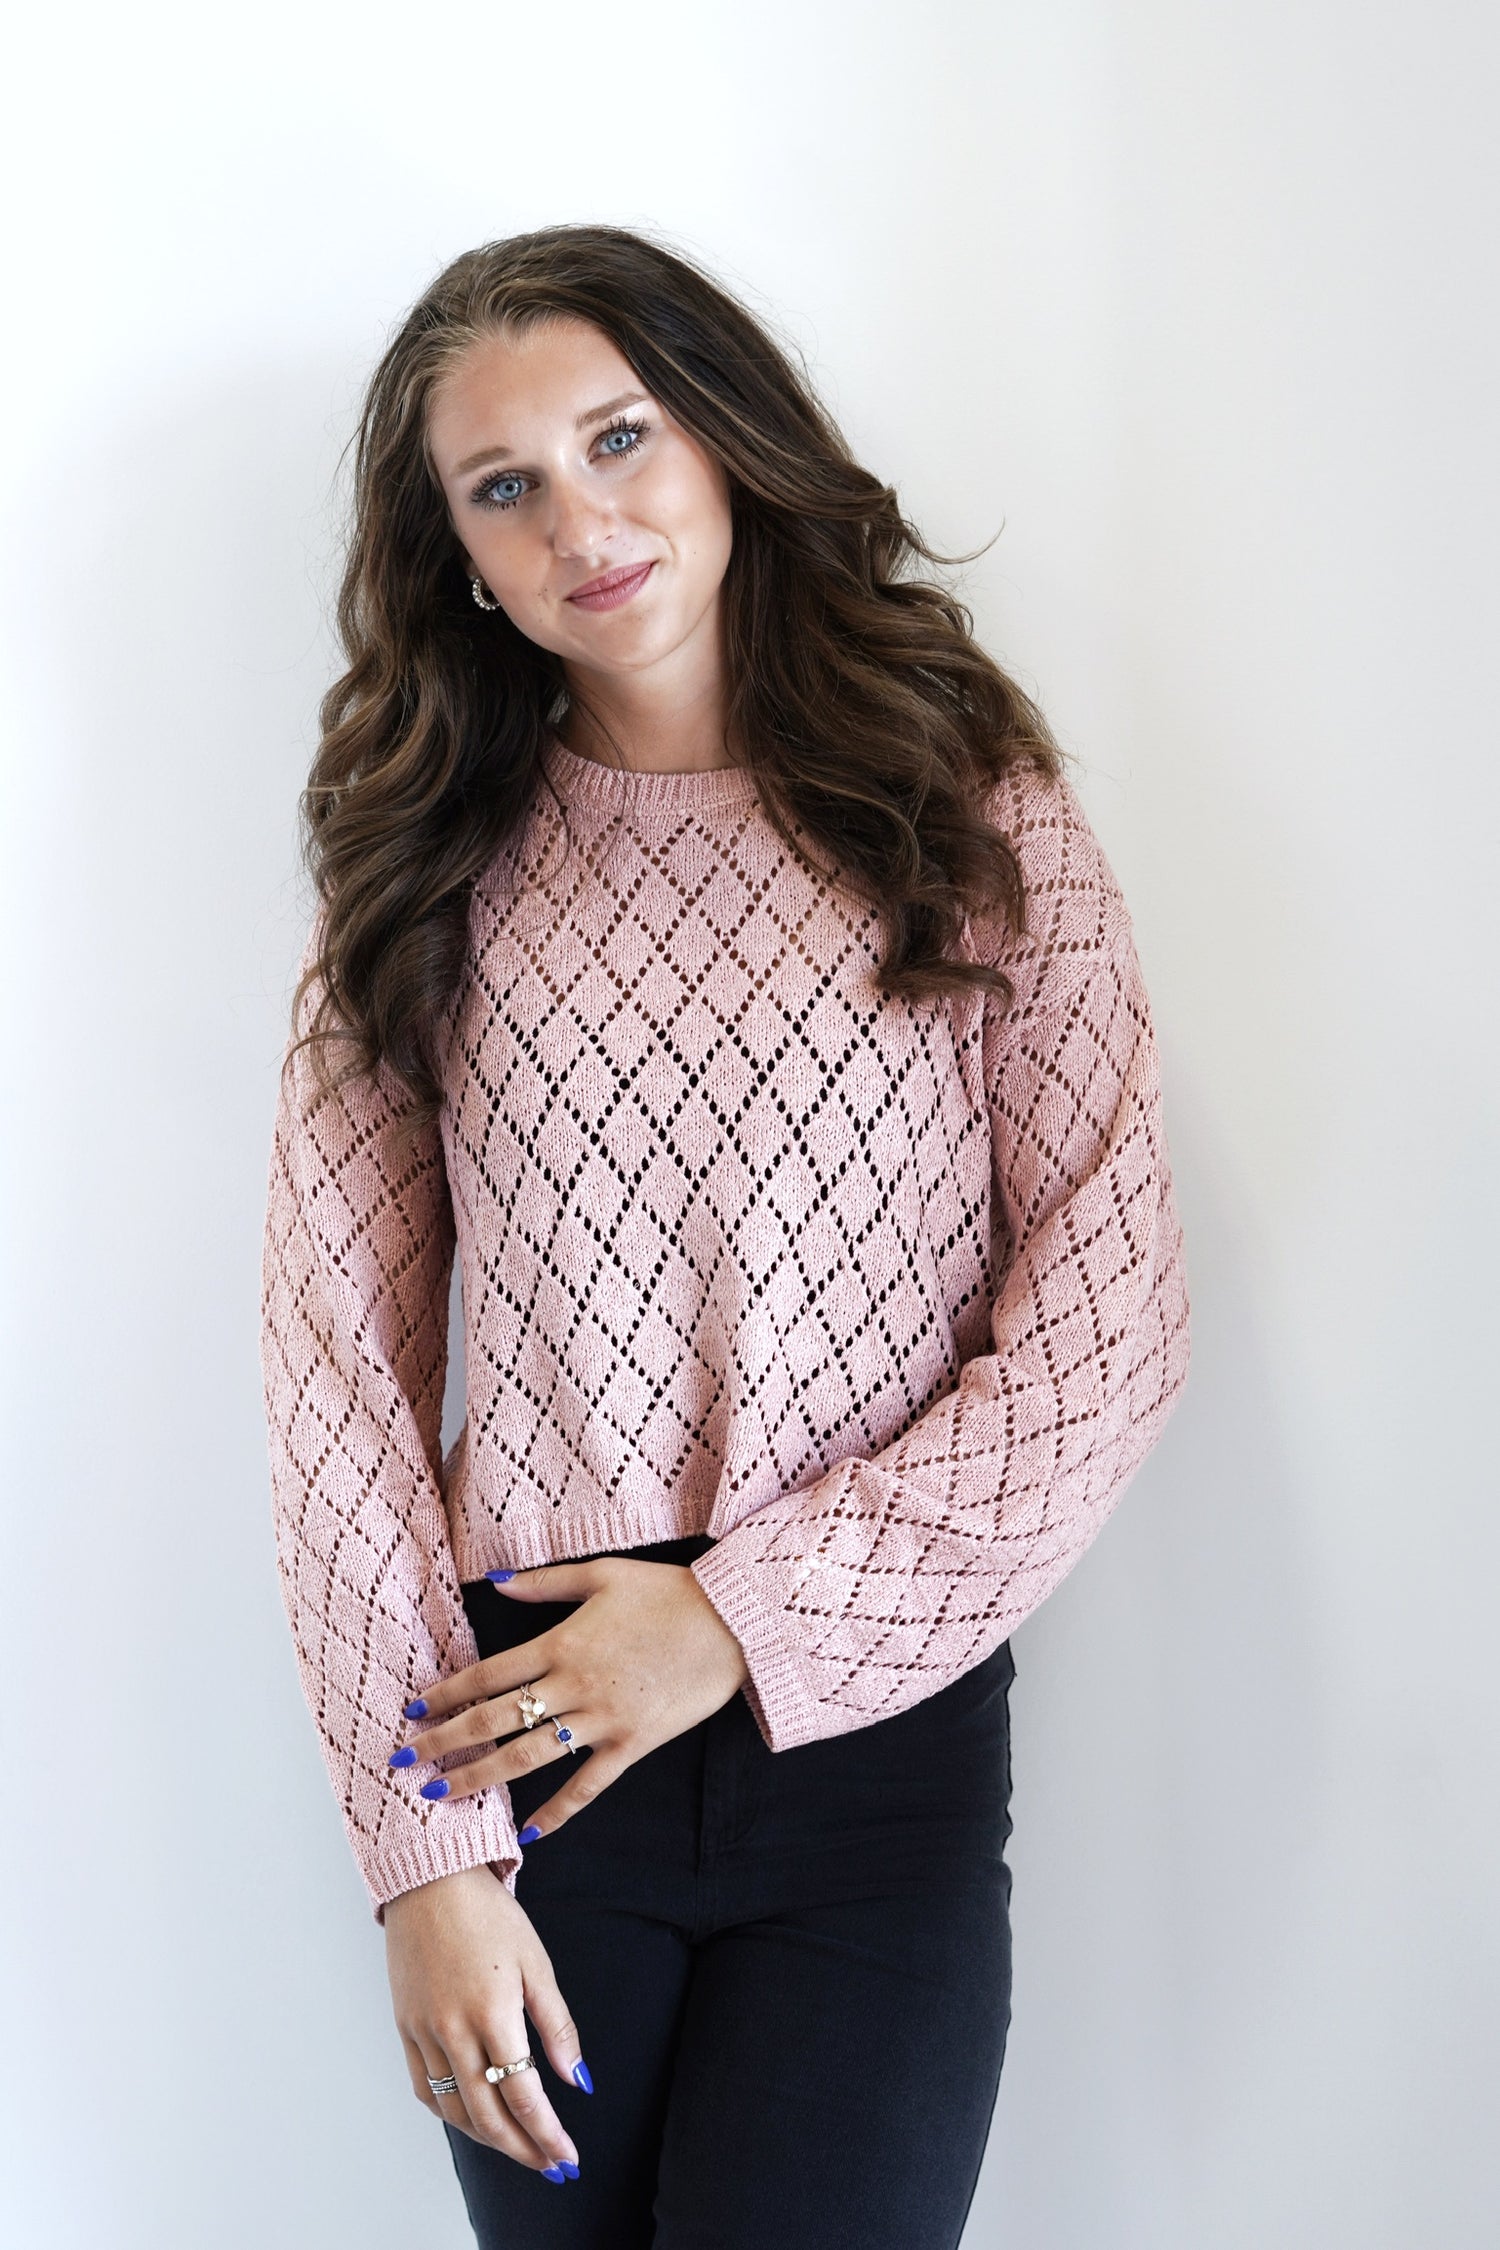 Makenna Knit Sweater Crew Neckline Long Sleeve Pink Color Skimmer Length Knit Pattern Fabric Content: 54% Acrylic 46% Recycled Nylon